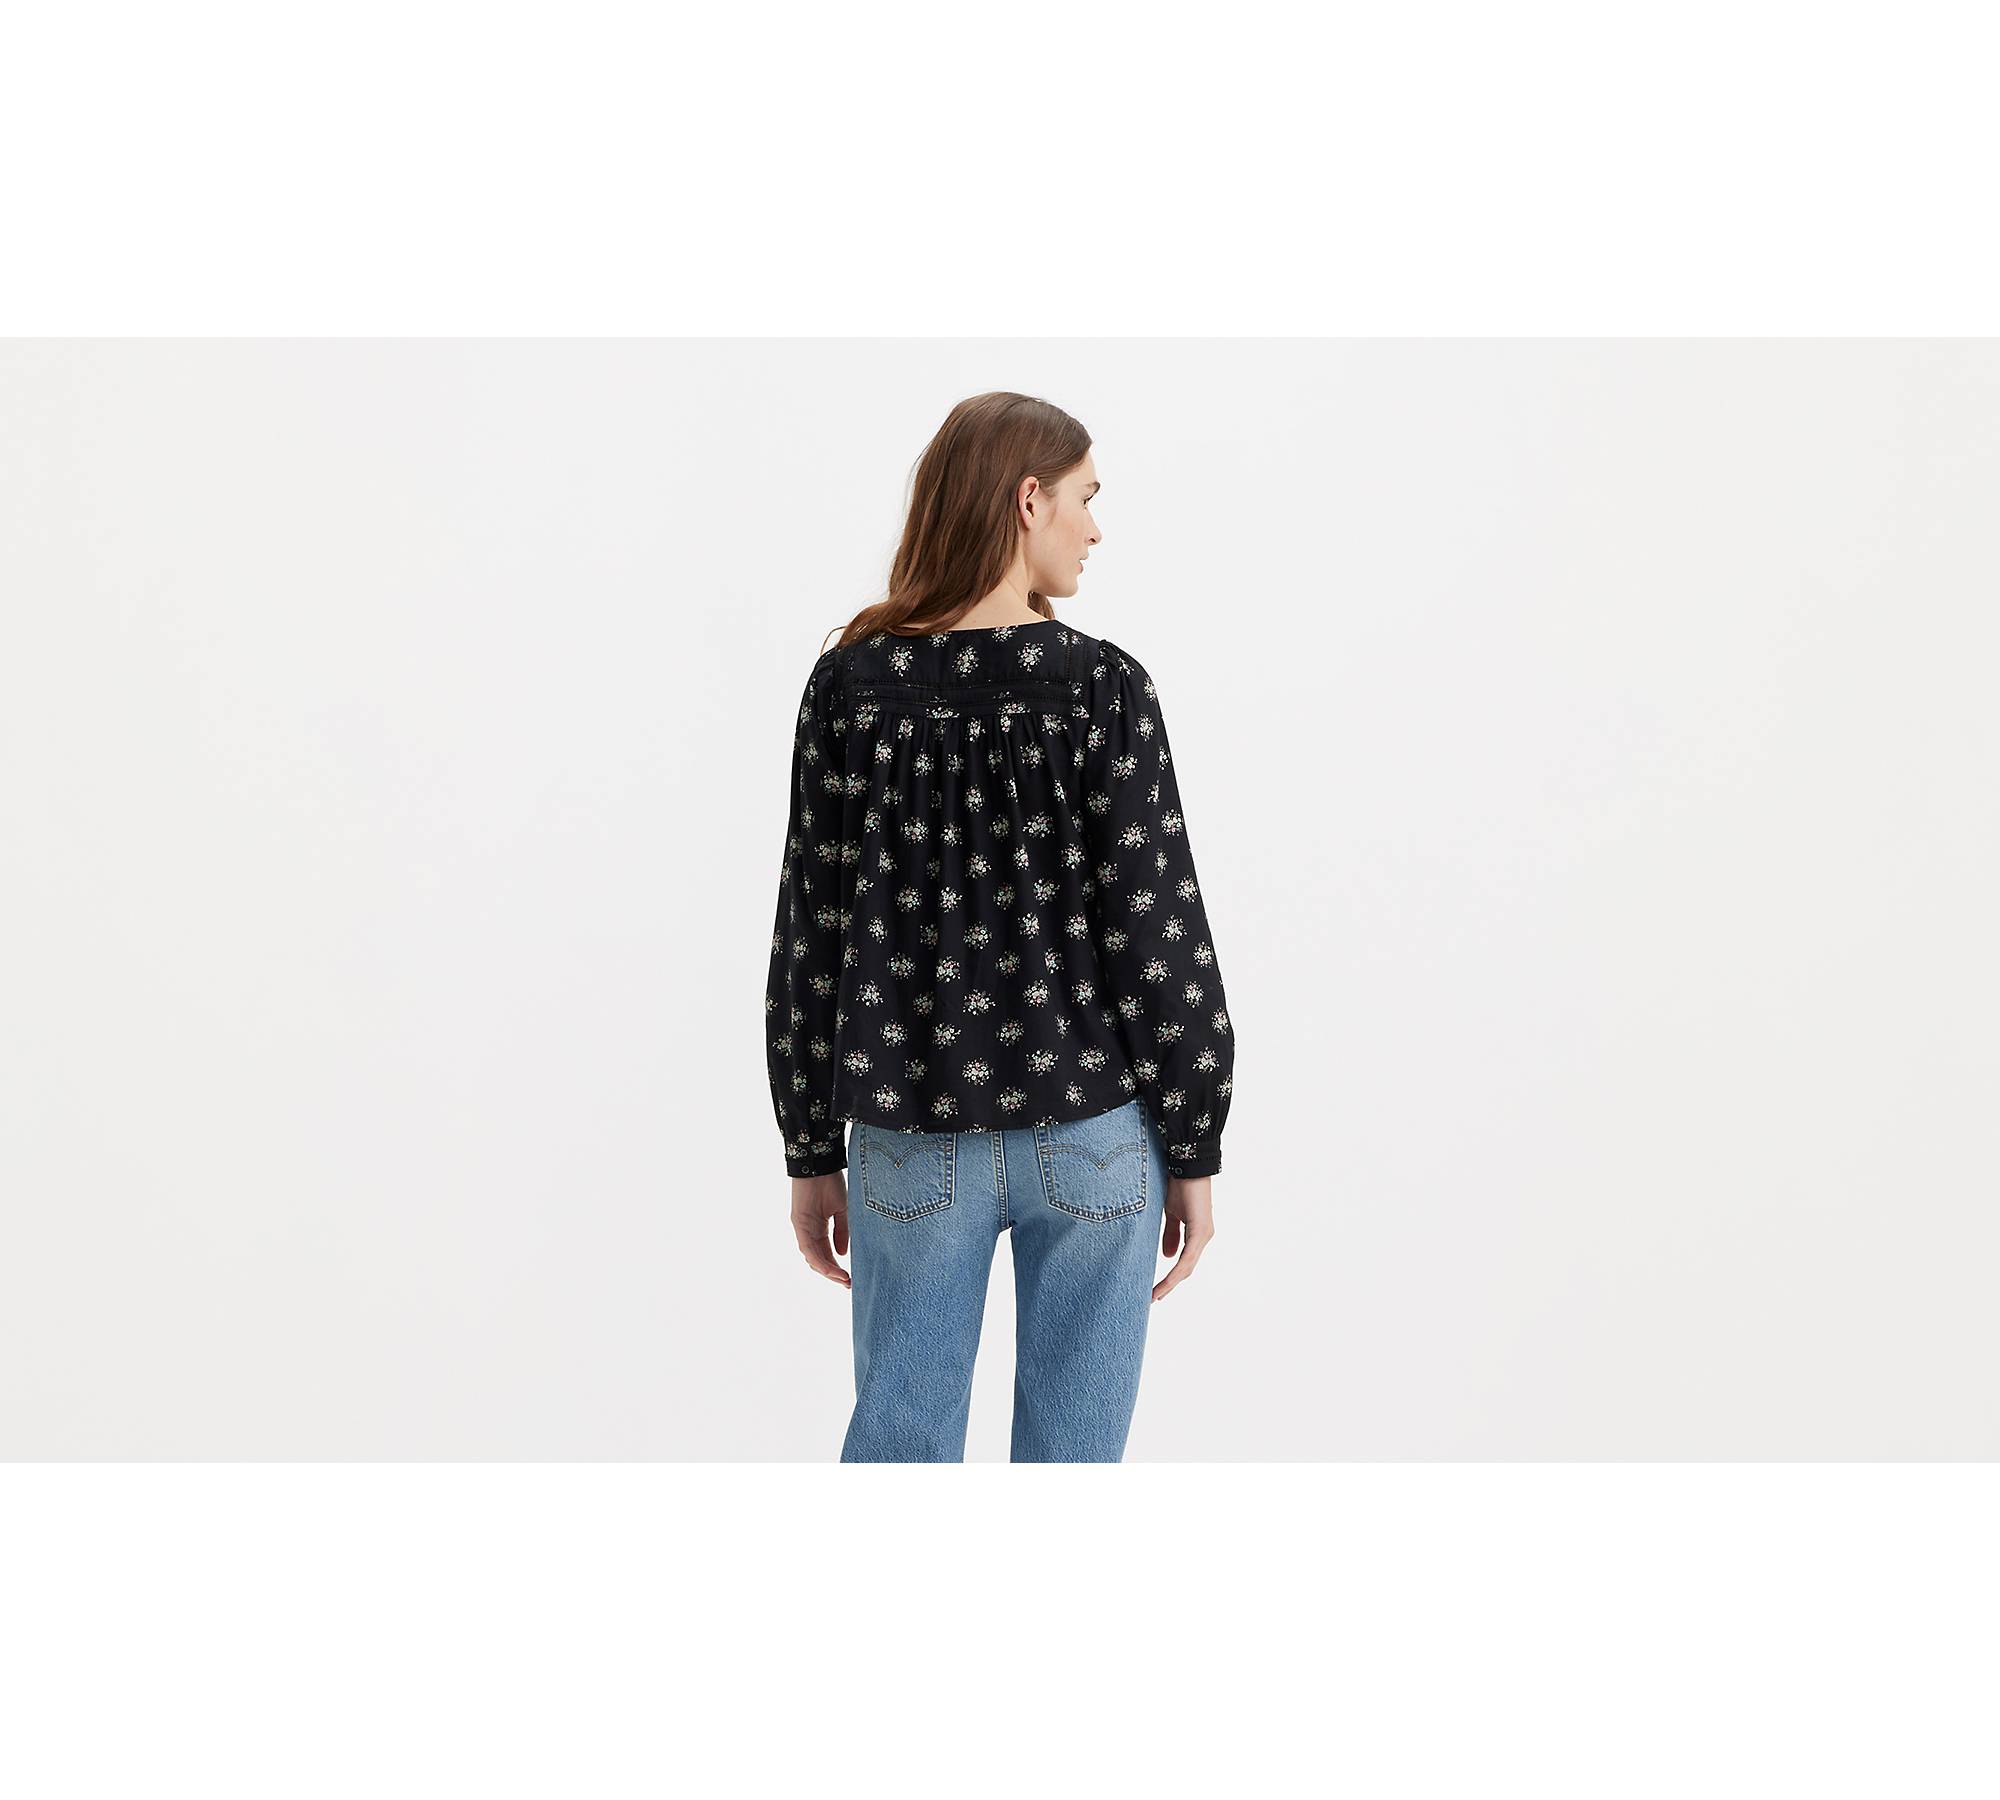 Levi's Floral Blouse Is 63% Off at Walmart in 2 Colors